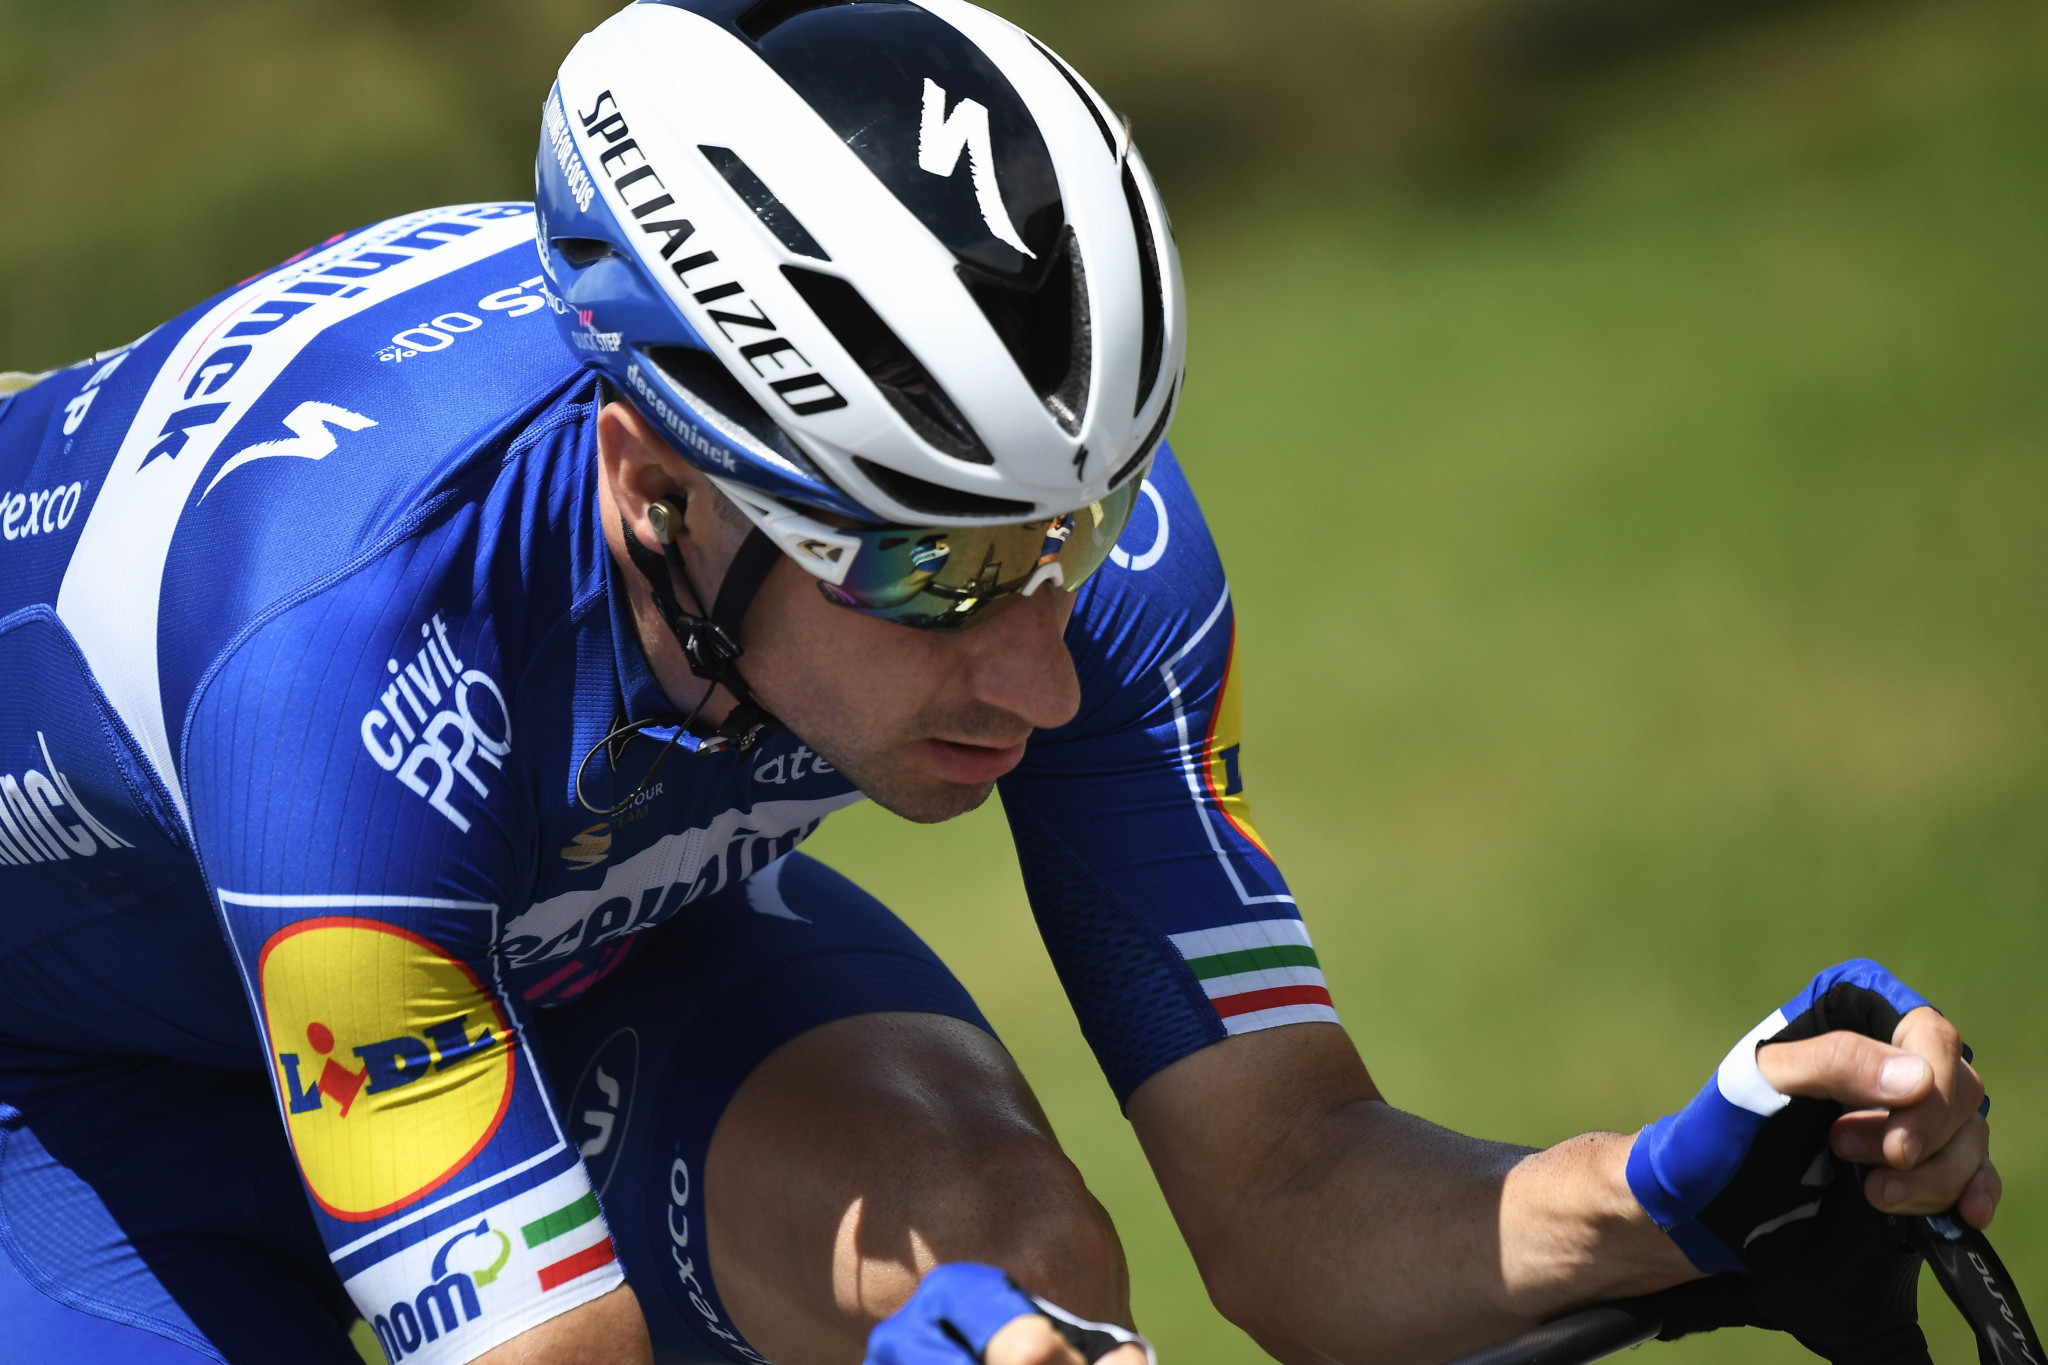 Viviani among star line-up for UEC European Road Cycling Championships